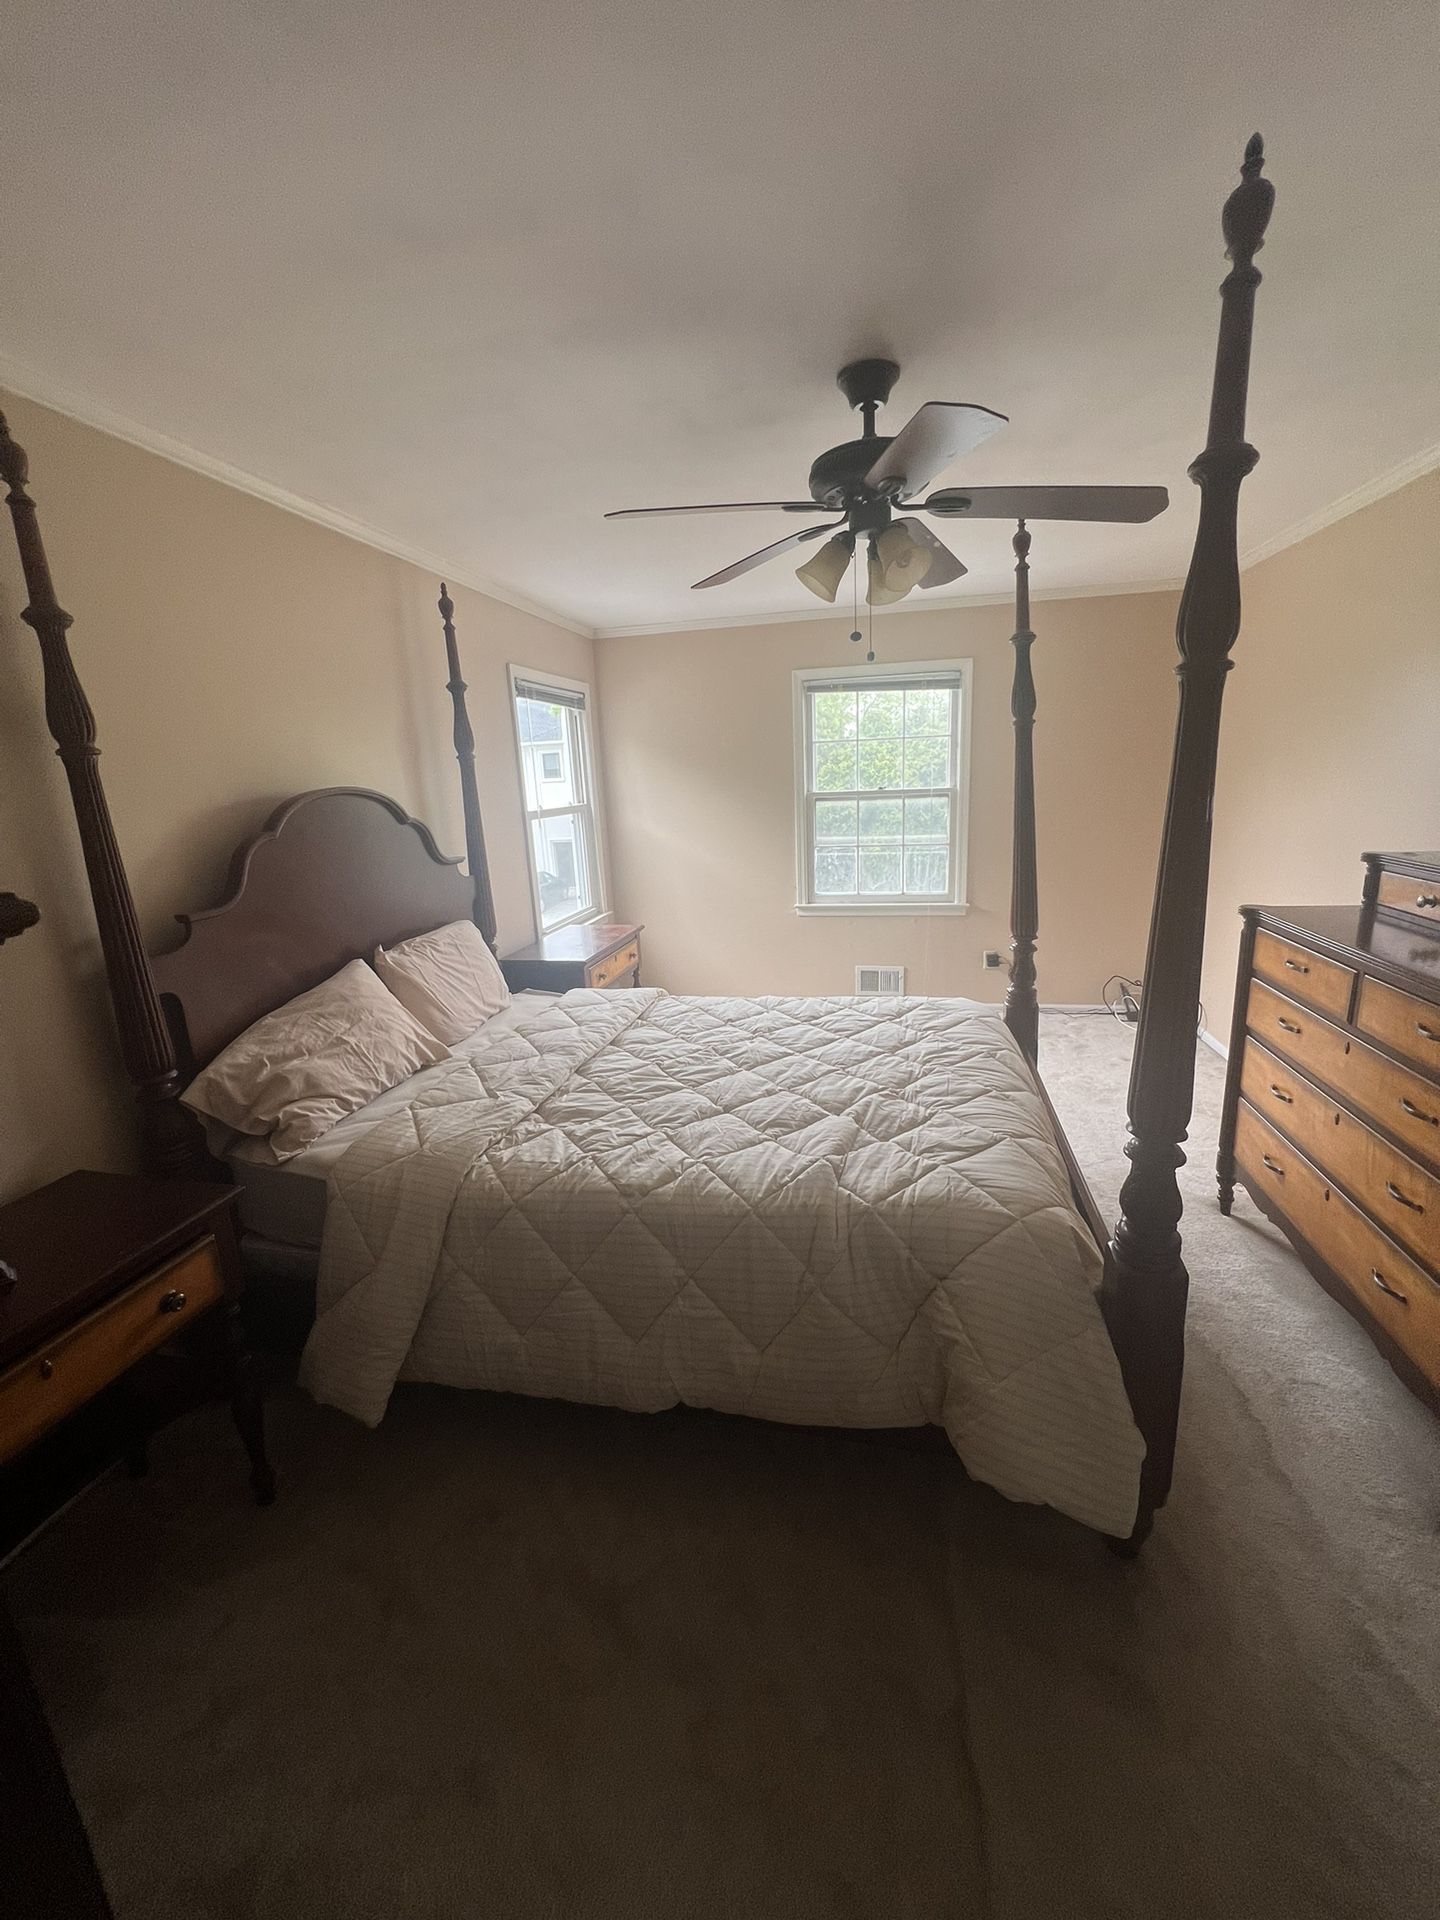 Queen Size Bed, Mattress, Two Side Tables, Mirror, 2 Armours